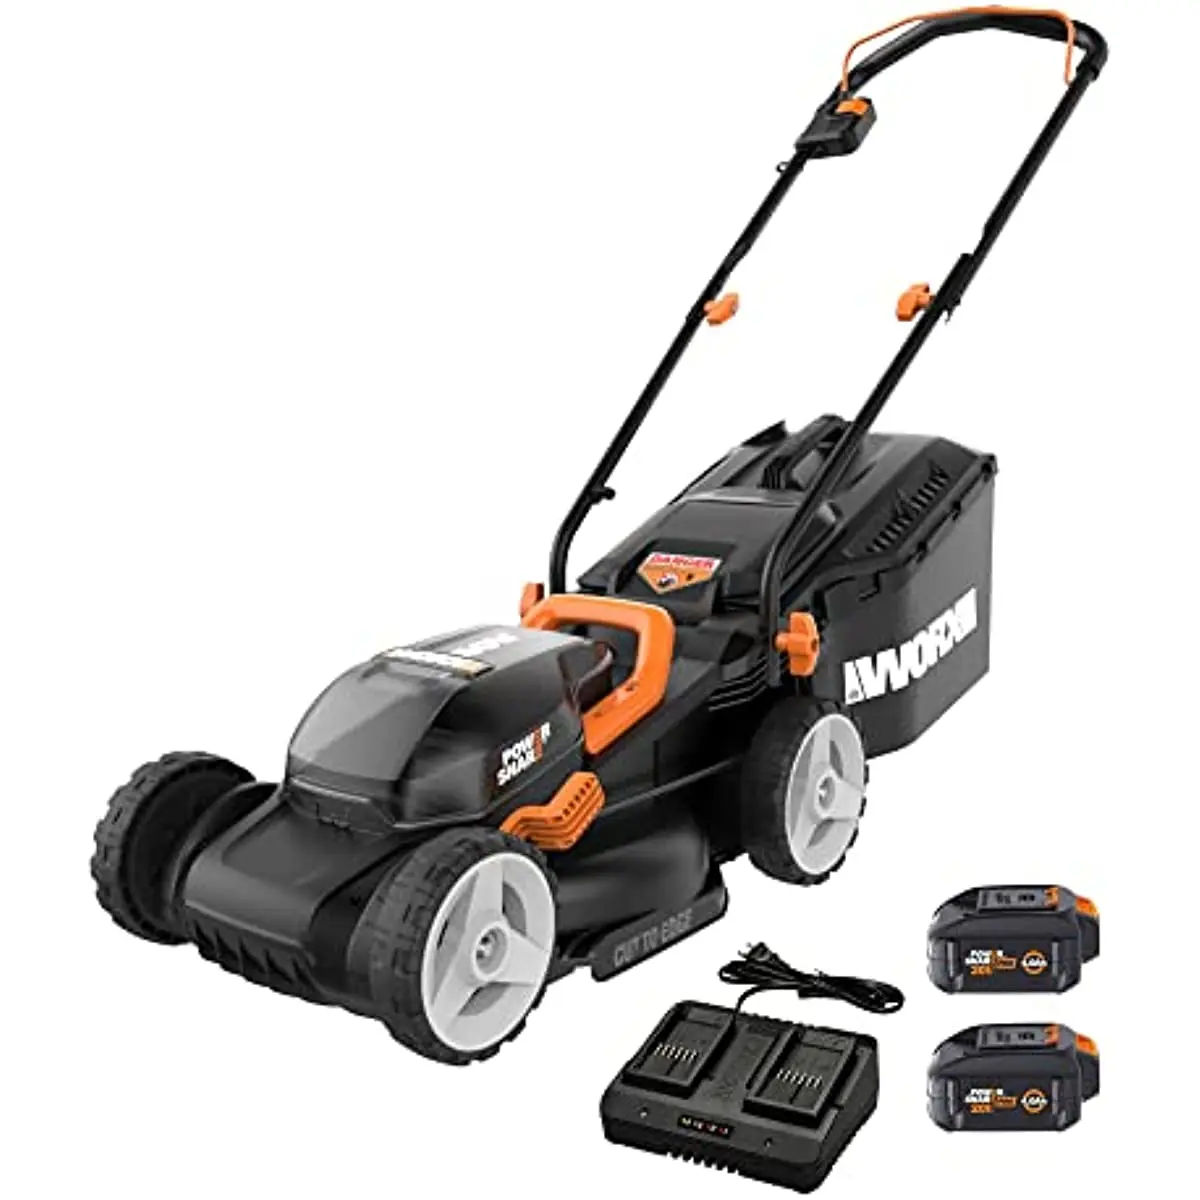 

Worx WG779 40V Power Share 4.0Ah 14" Cordless Lawn Mower (Batteries & Charger Included)